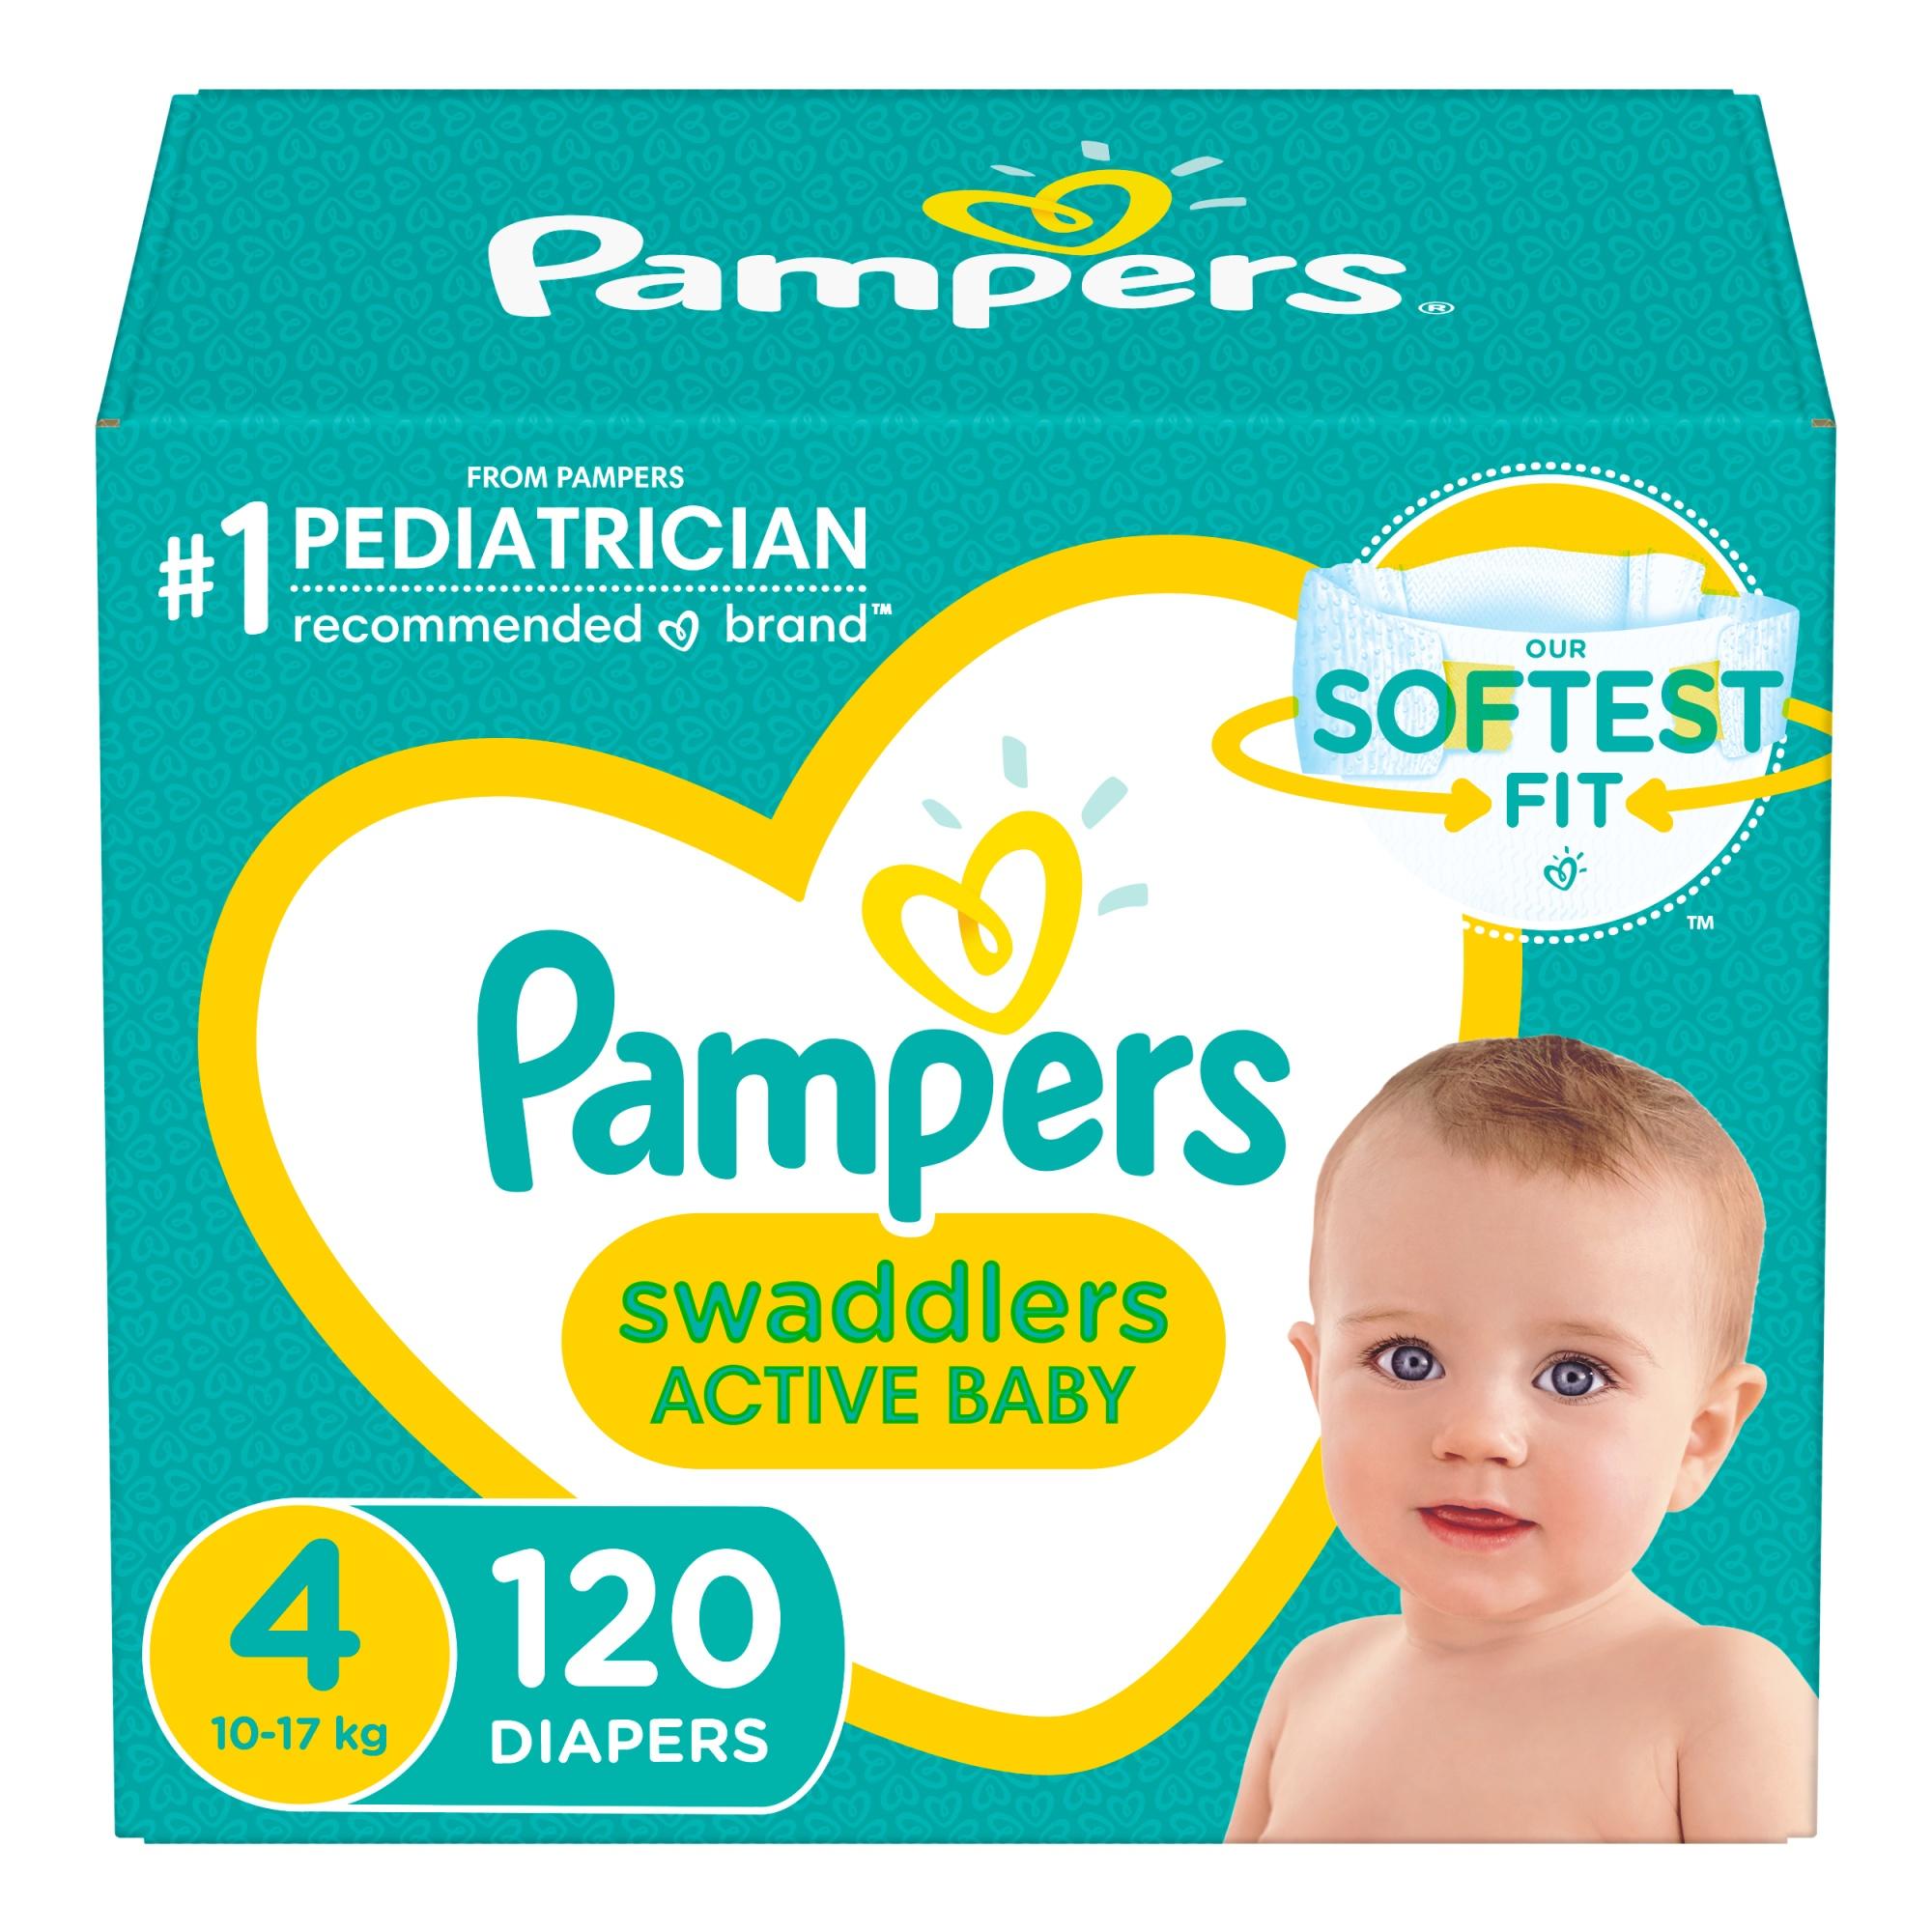 Pampers Swaddlers - Pañales desechables muy suaves para bebé talla 7, 88  unidades